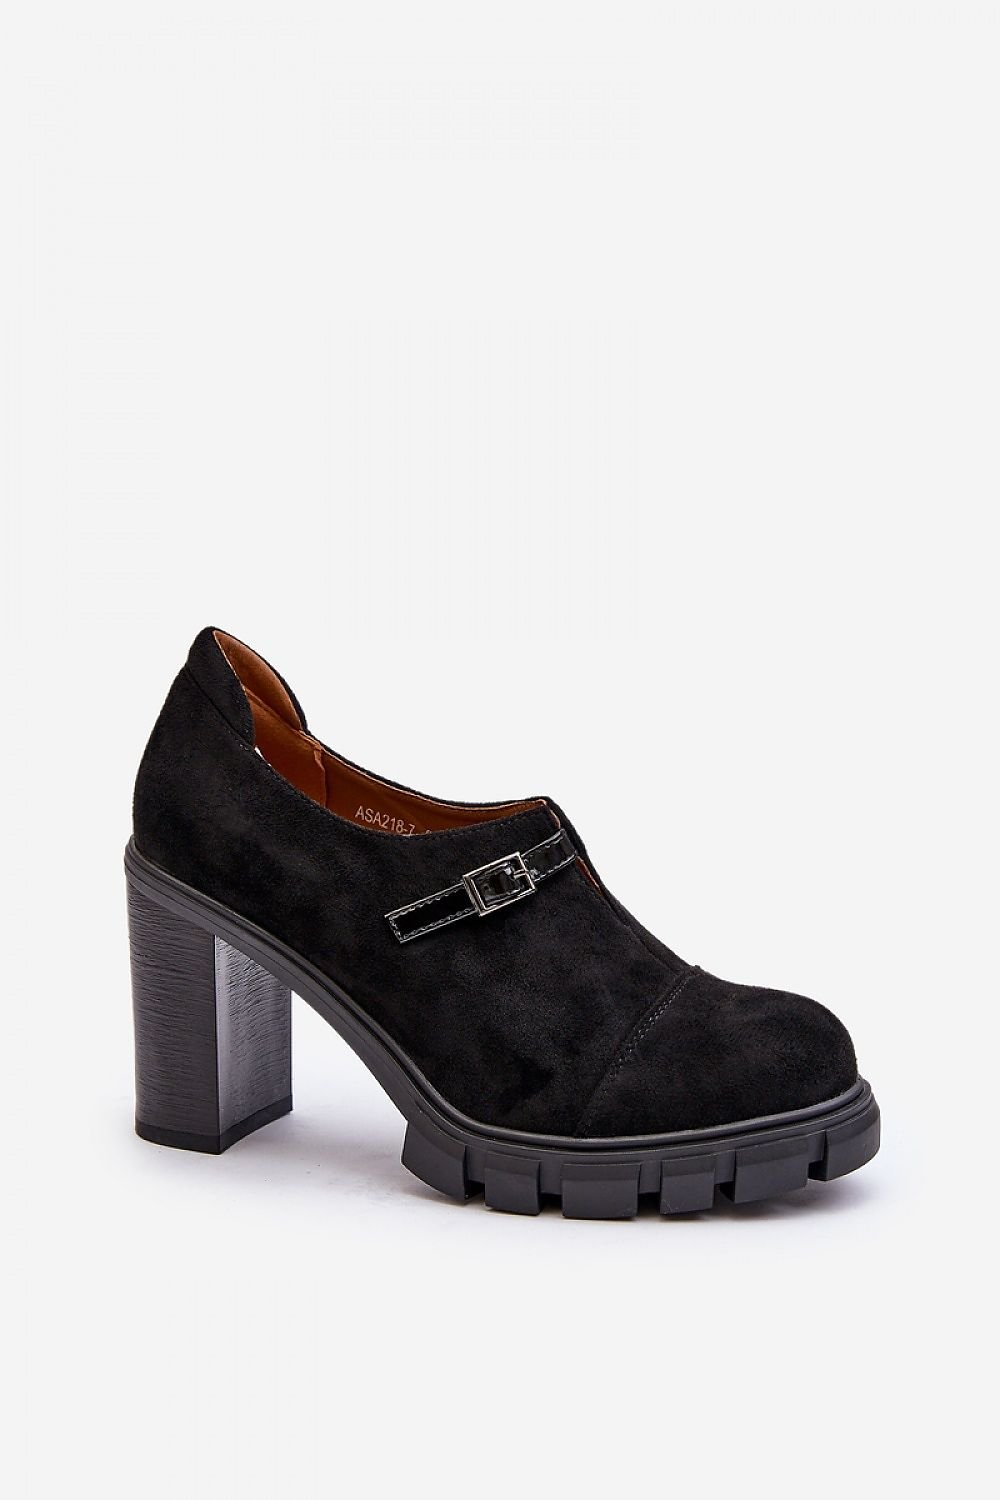 Heeled low shoes model 194702 Step in style